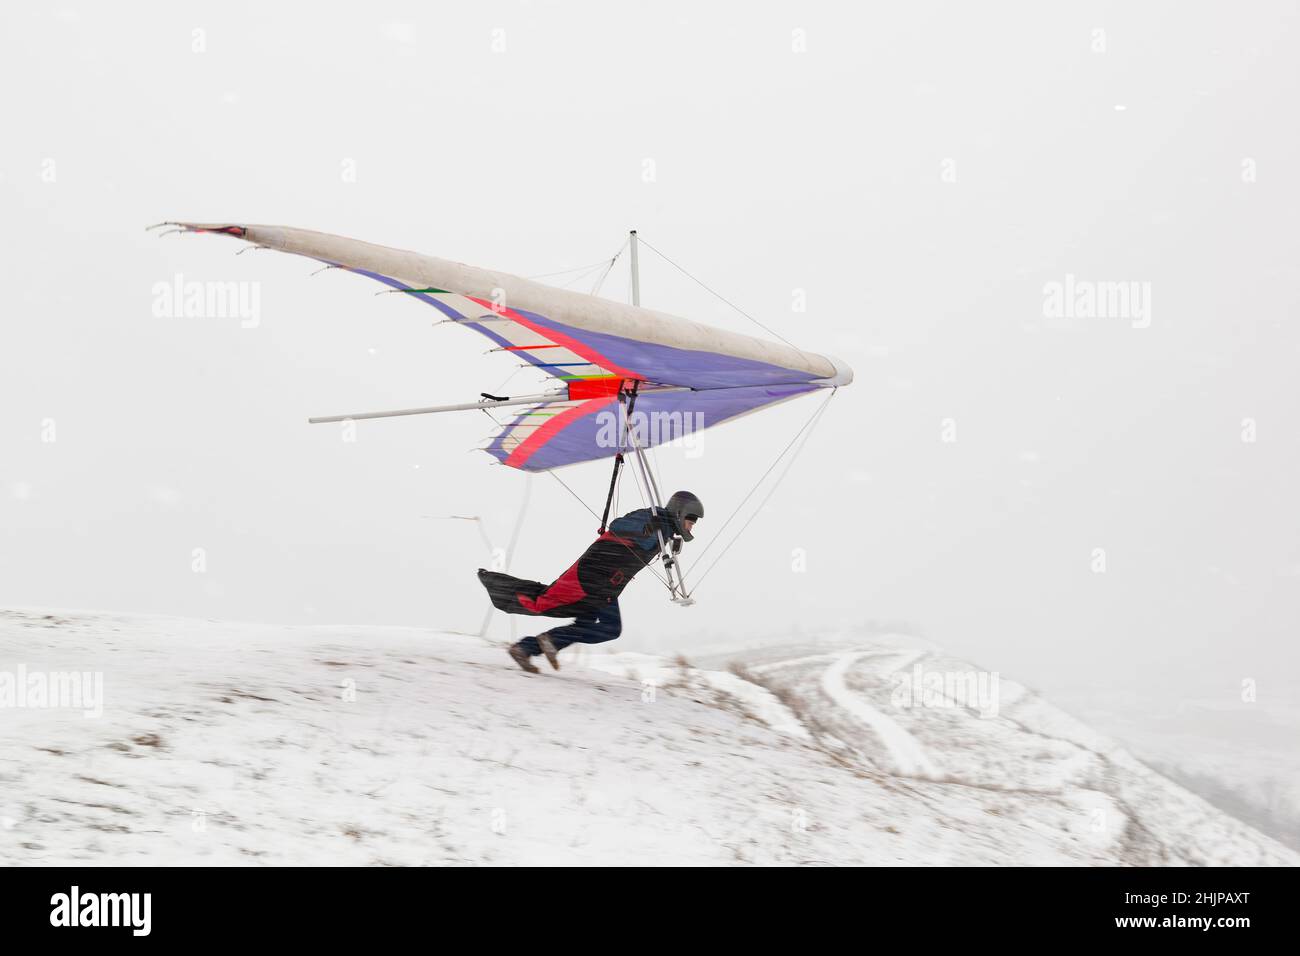 Hang glider pilots runs on the slope in winter. Extreme sport Stock Photo